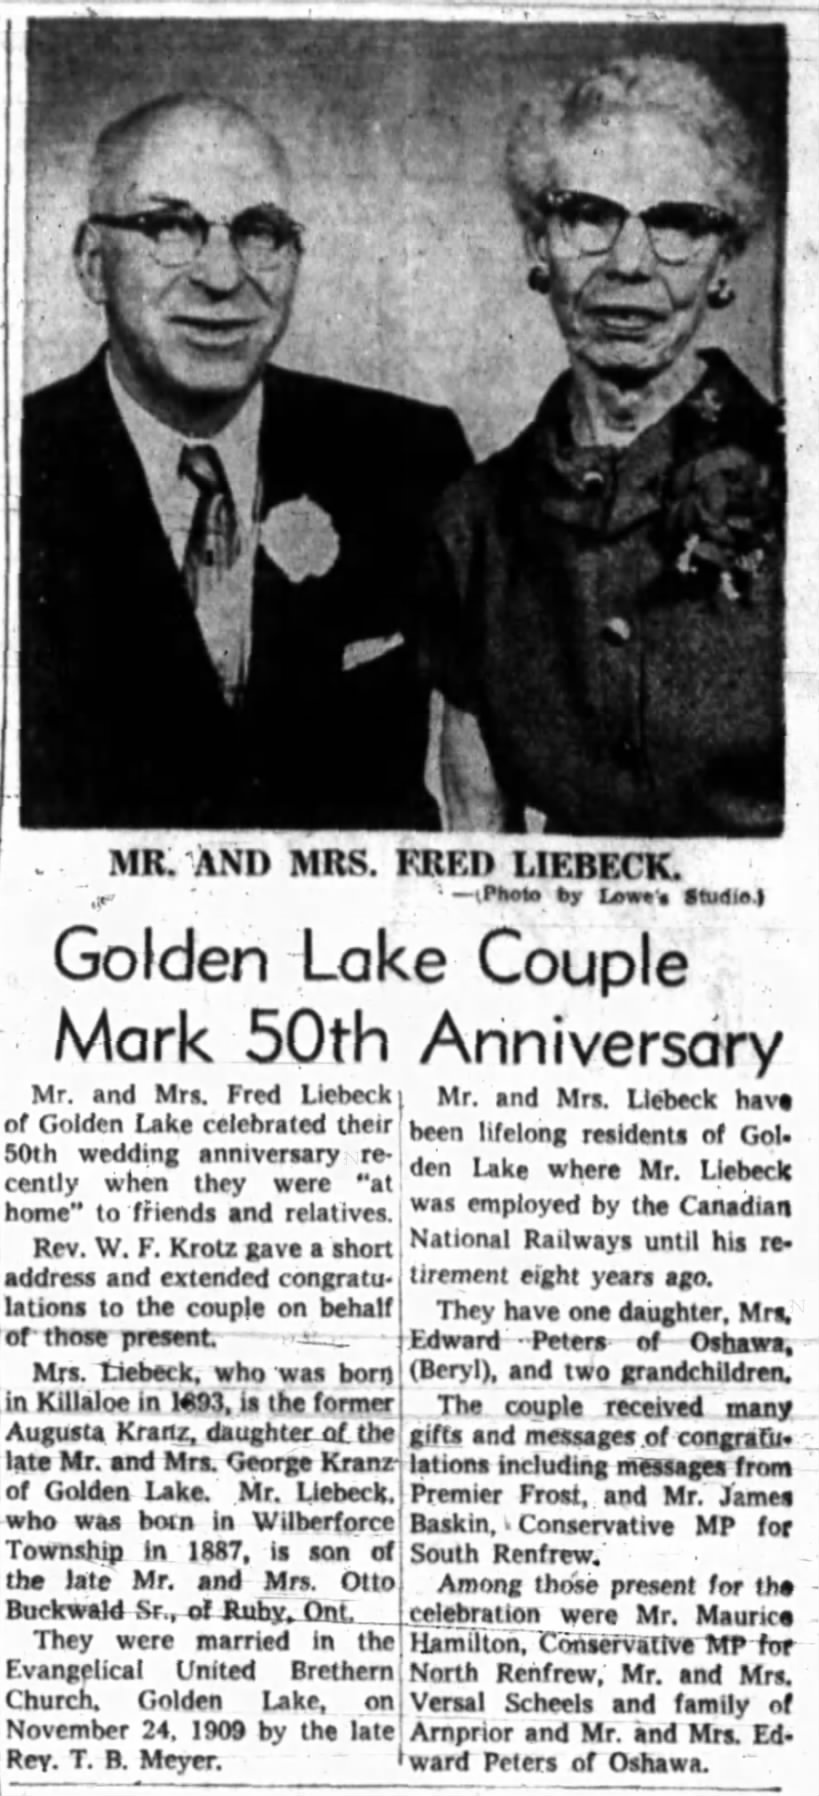 50th Anniversary: Mr. and Mrs. Fred Liebeck